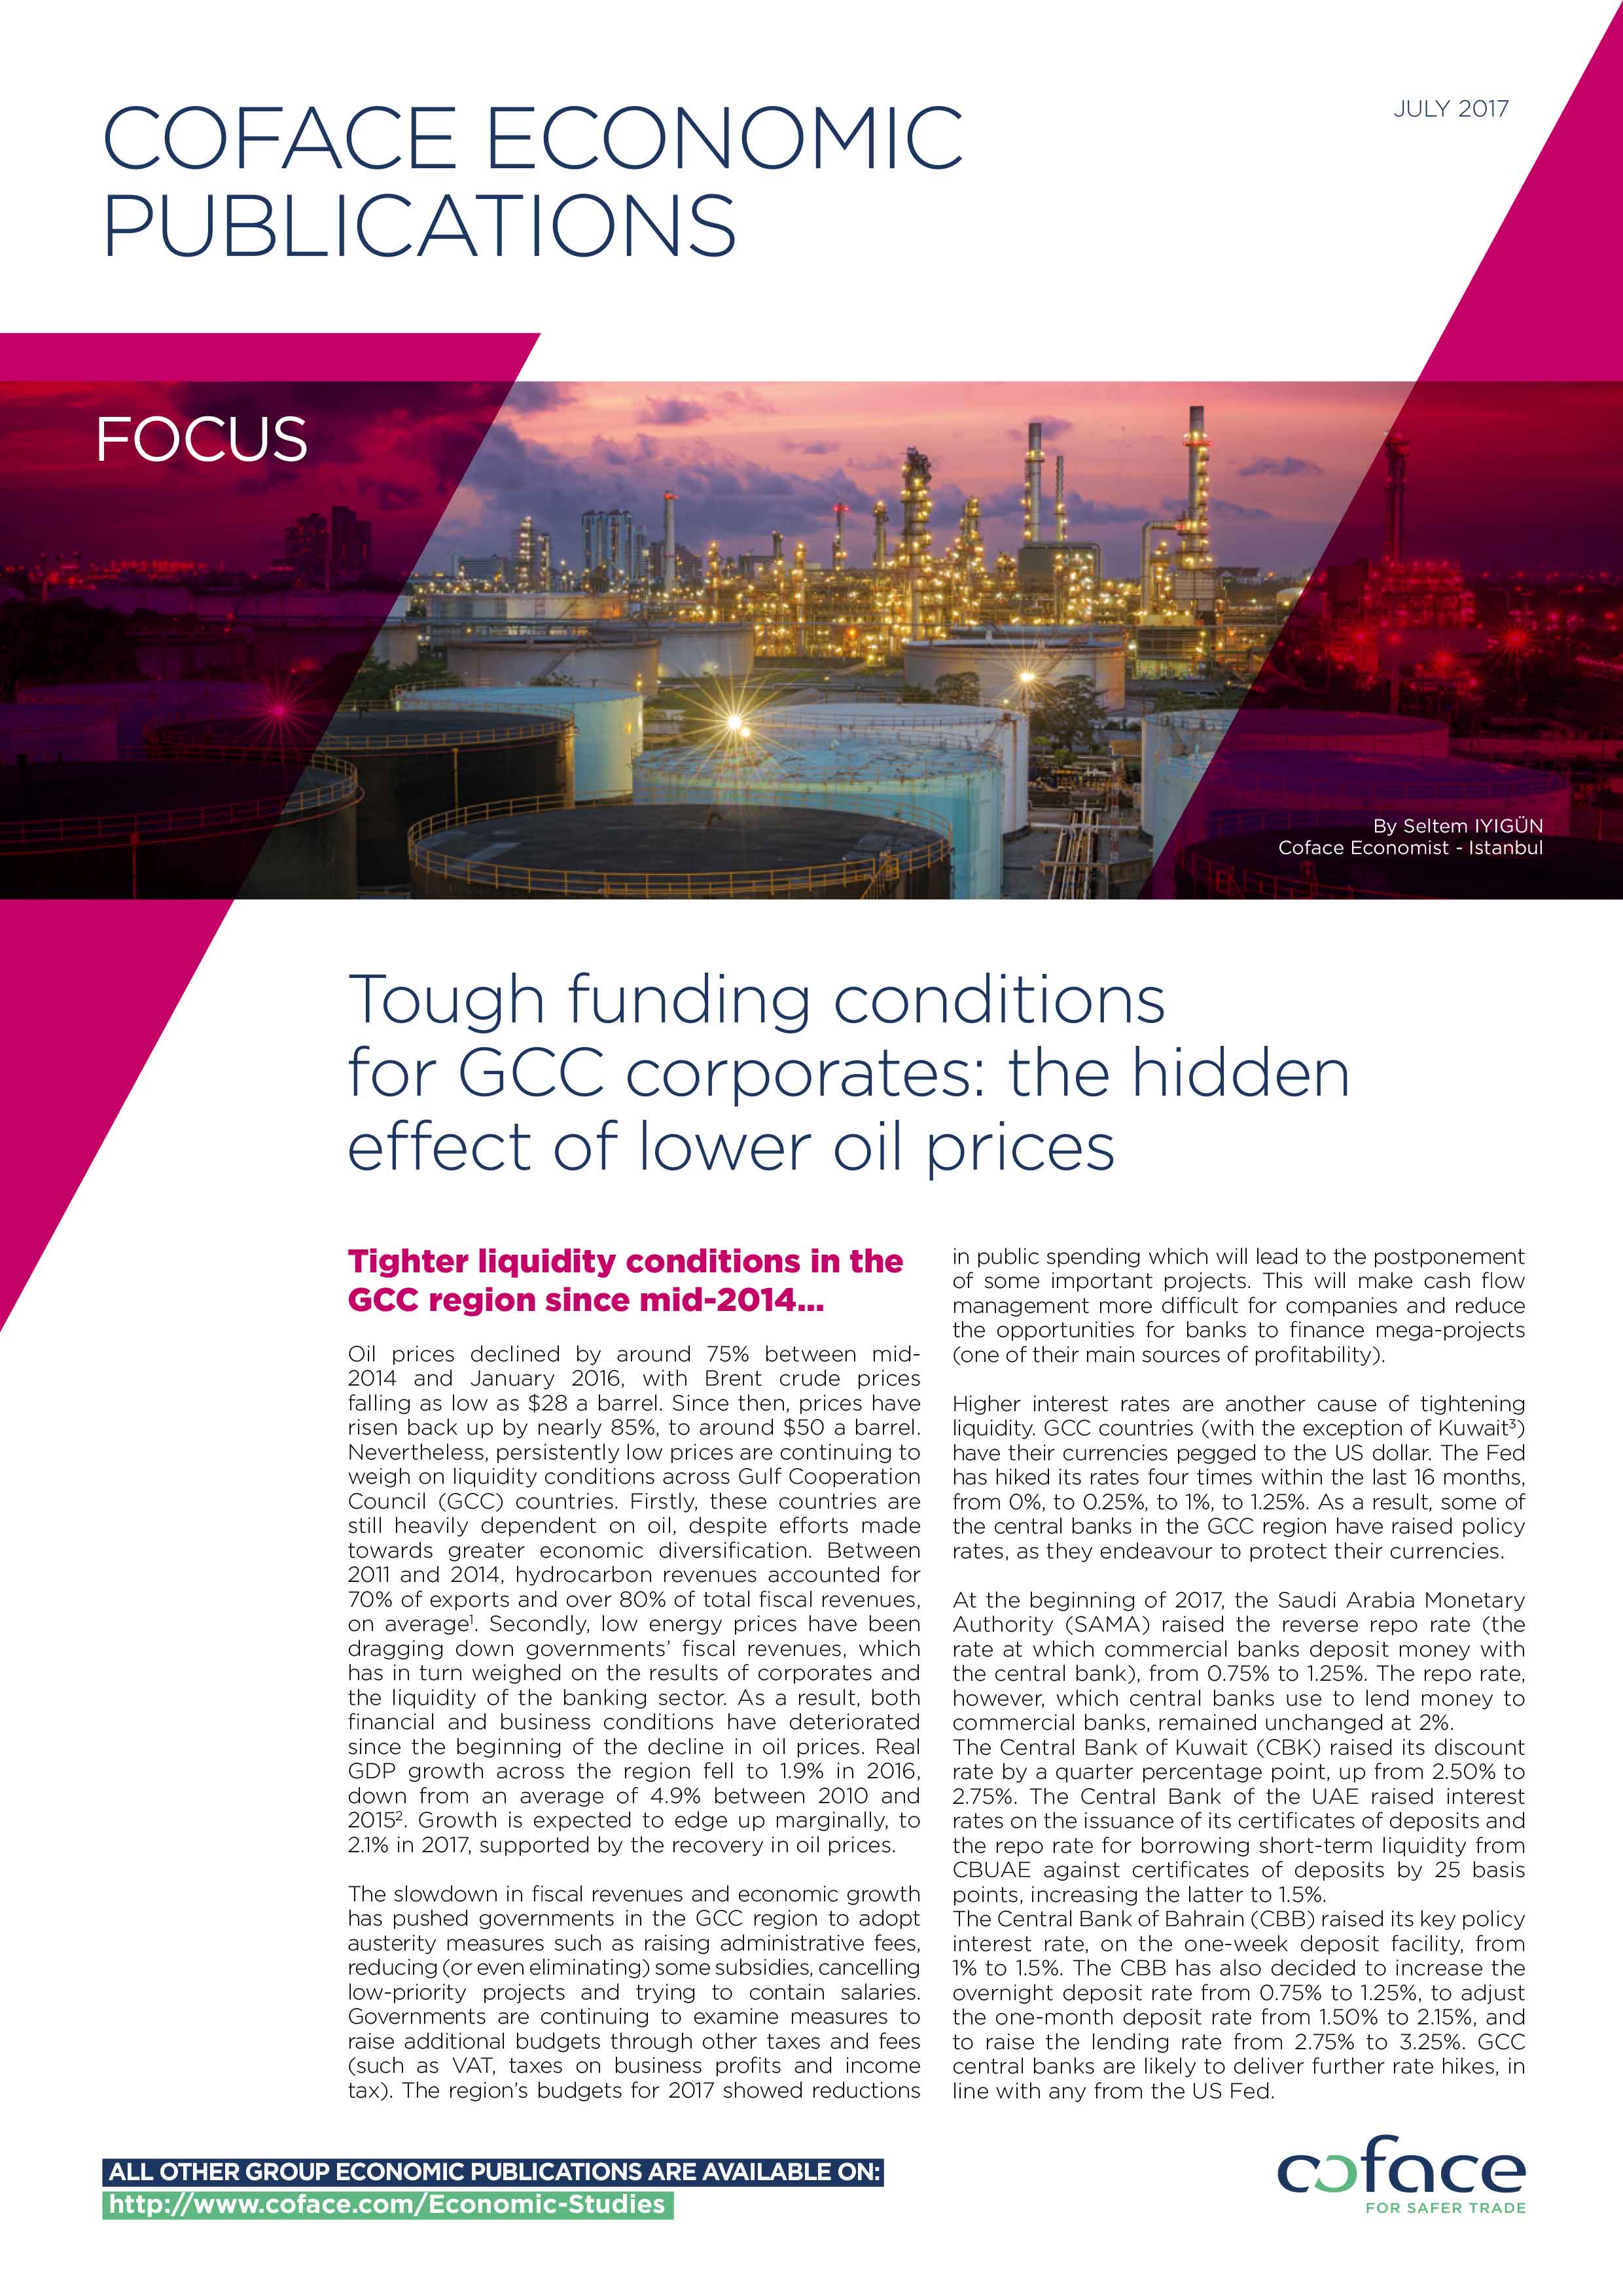 Tough funding conditions for GCC corporates: the hidden effect of lower oil prices